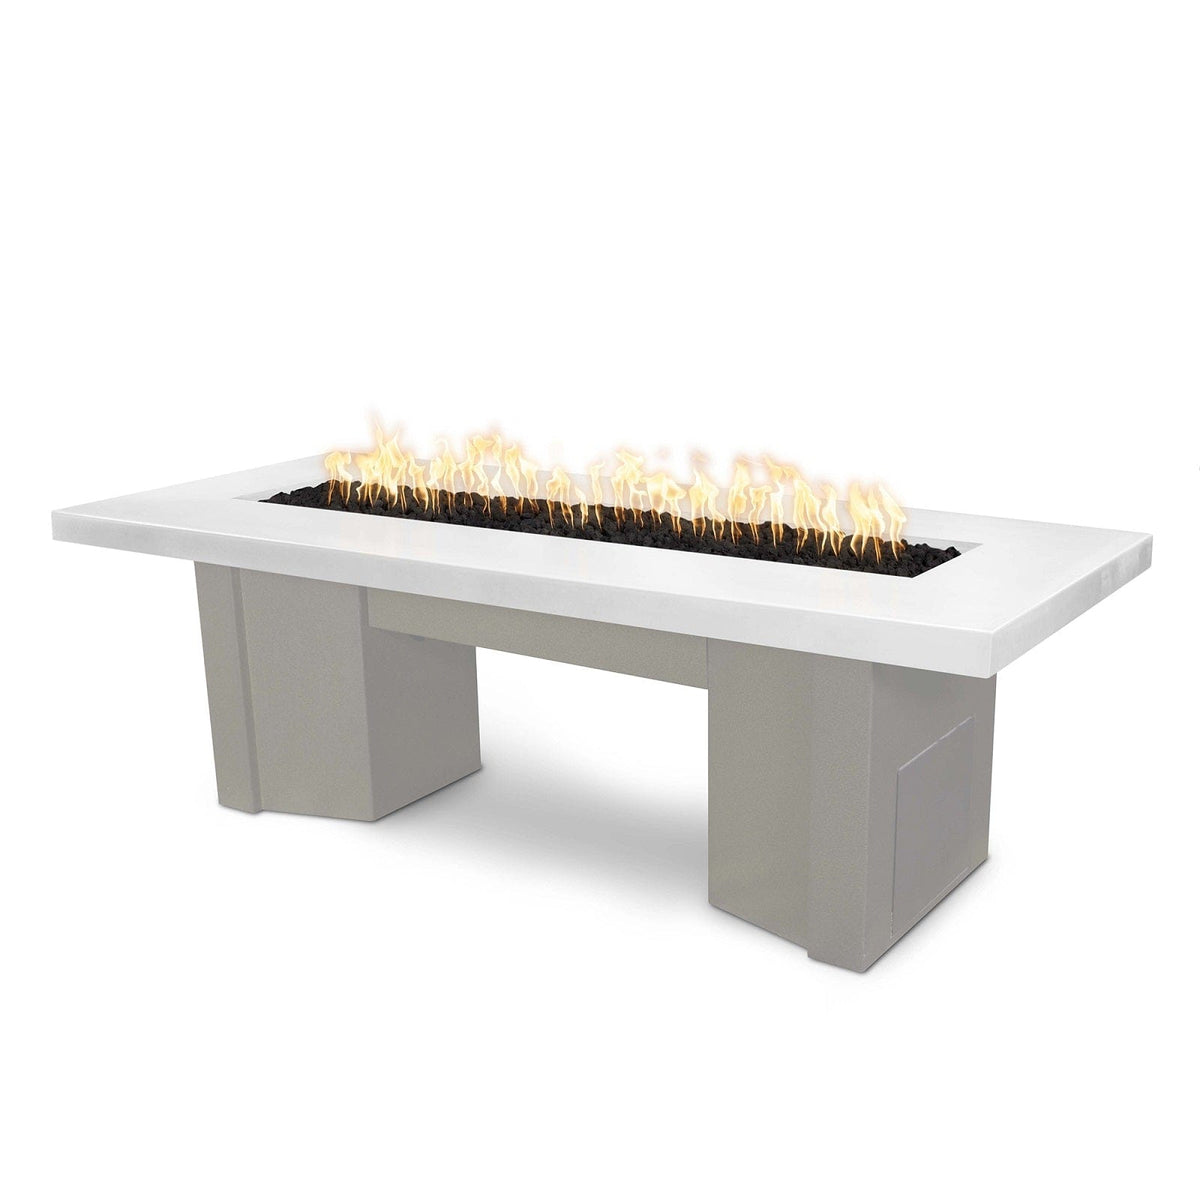 The Outdoor Plus Fire Features Limestone (-LIM) / Pewter Powder Coated Steel (-PEW) The Outdoor Plus 78&quot; Alameda Fire Table Smooth Concrete in Natural Gas - Flame Sense System with Push Button Spark Igniter / OPT-ALMGFRC78FSEN-NG